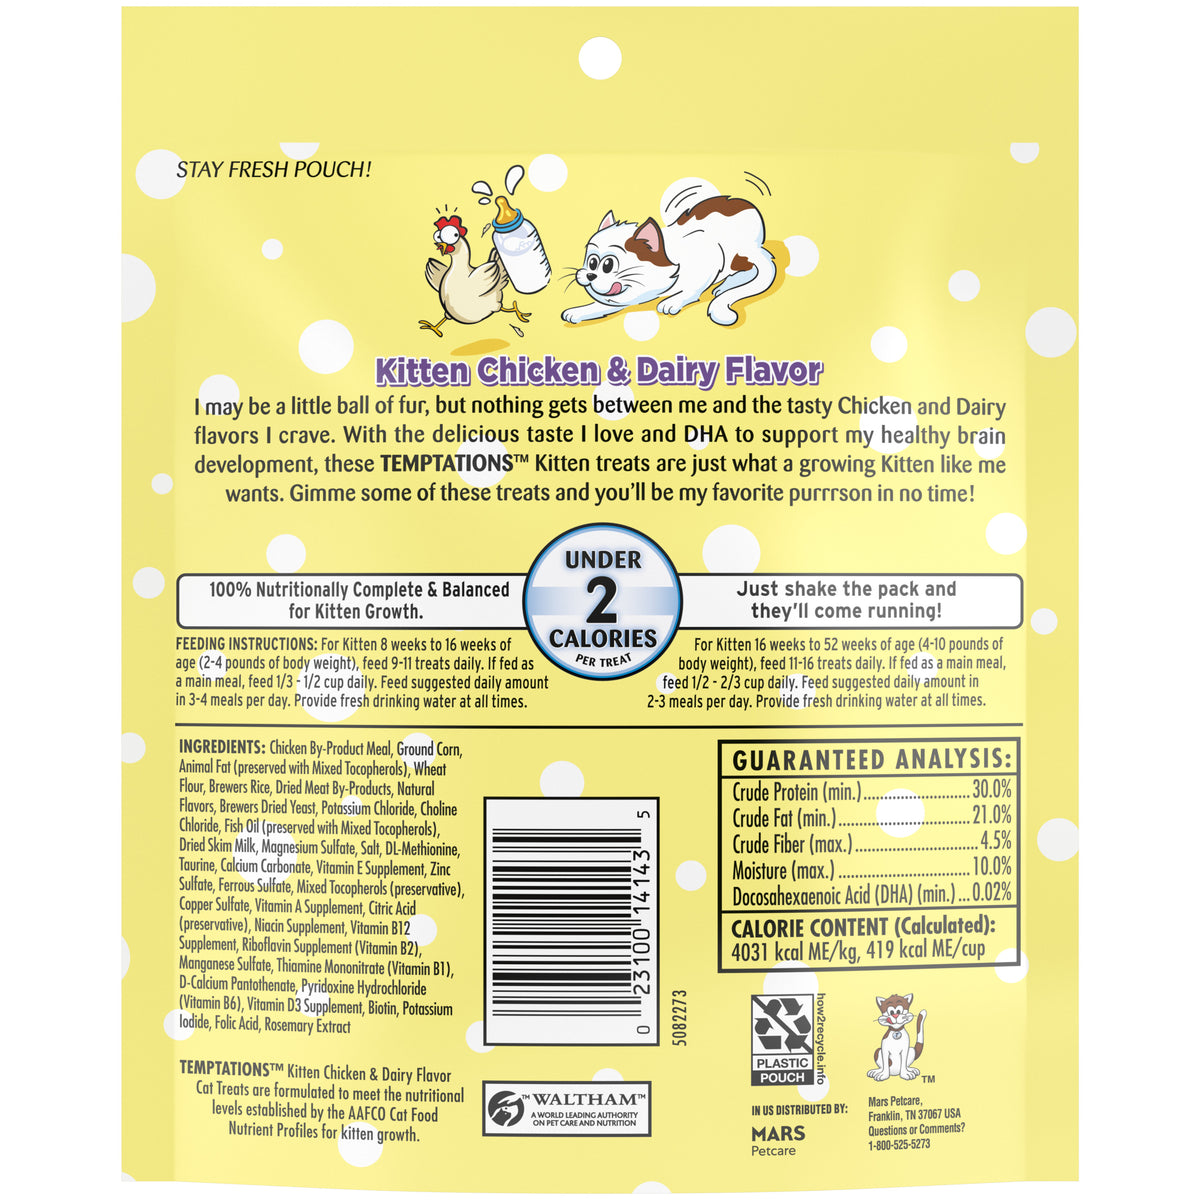 [Temptations][BUNDLE TEMPTATIONS Crunchy and Soft Kitten Treats, Chicken and Dairy Flavor, 6.3 oz. Pouch][Back Image]